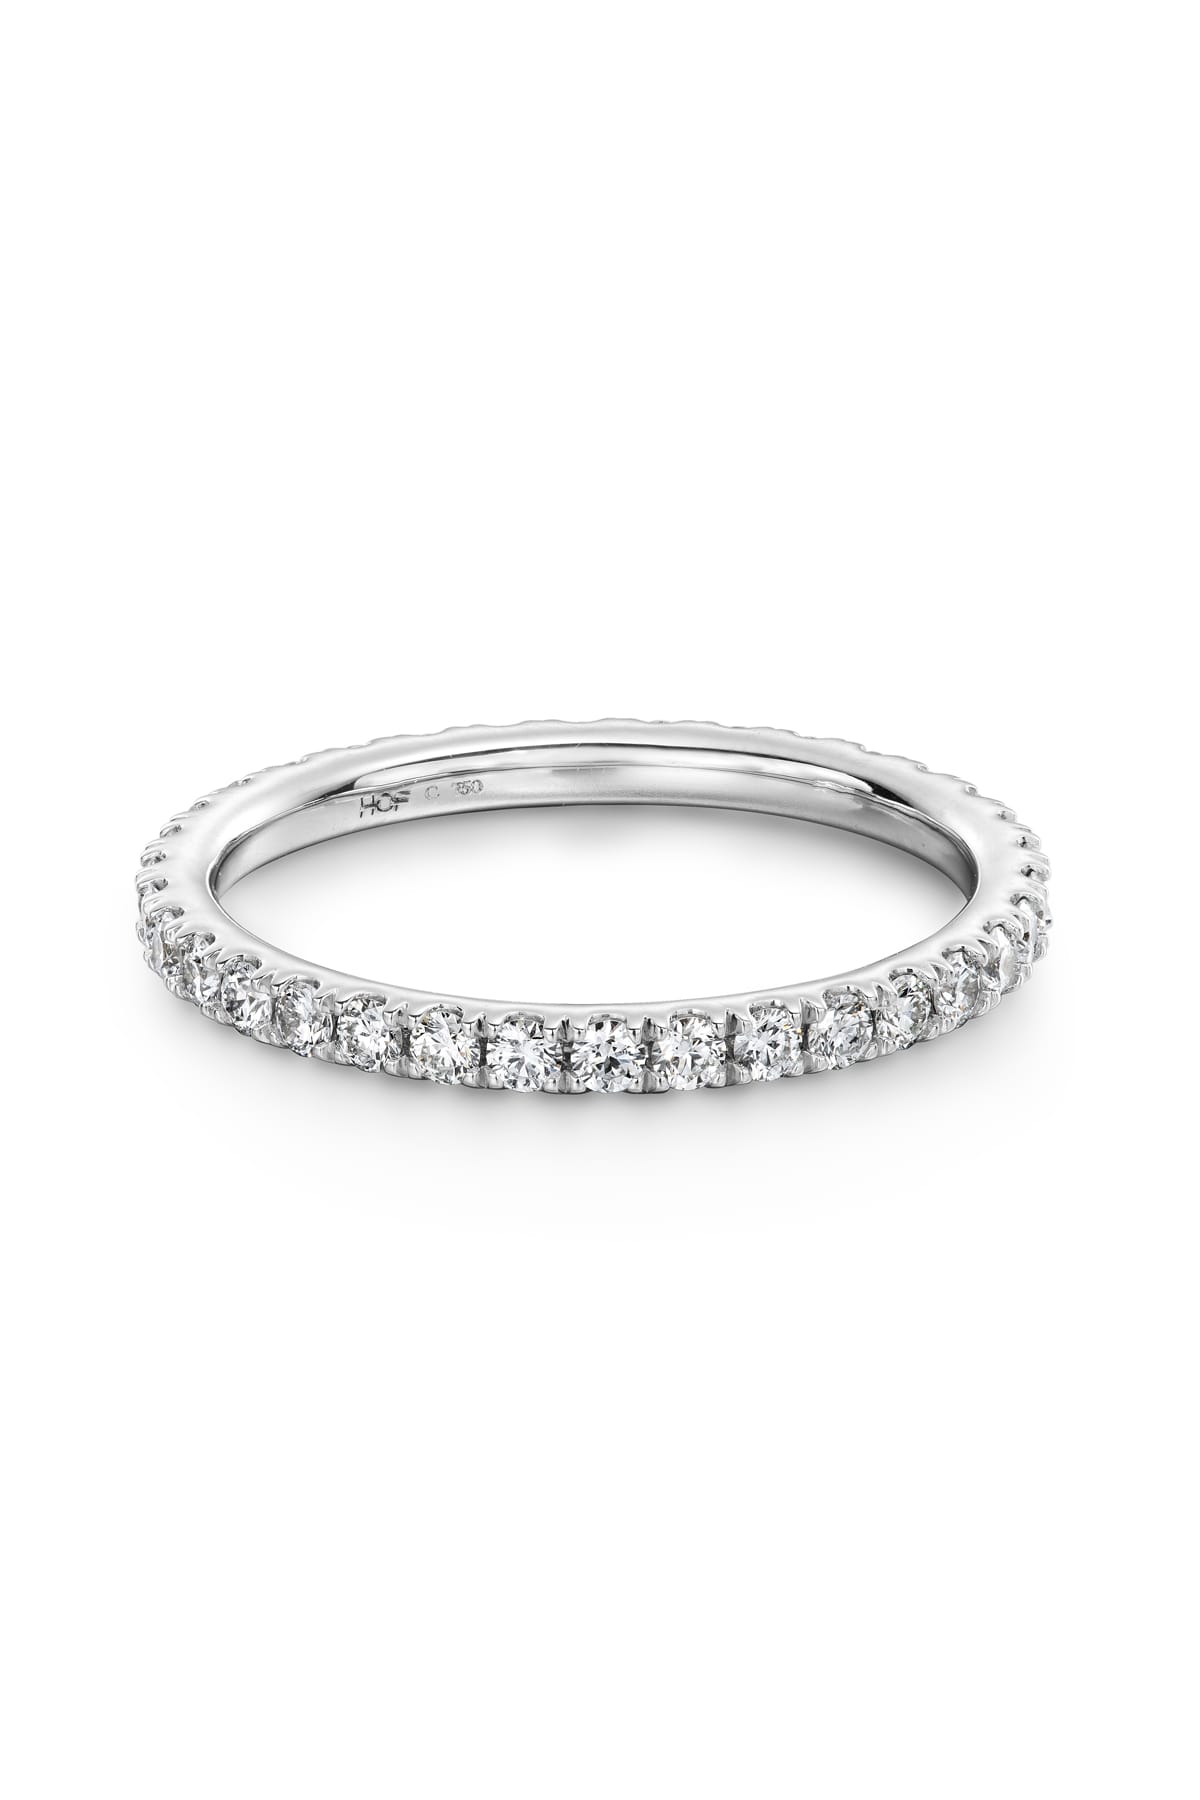 Transcend Wedding Band From Hearts On Fire available at LeGassick Diamonds and Jewellery Gold Coast, Australia.